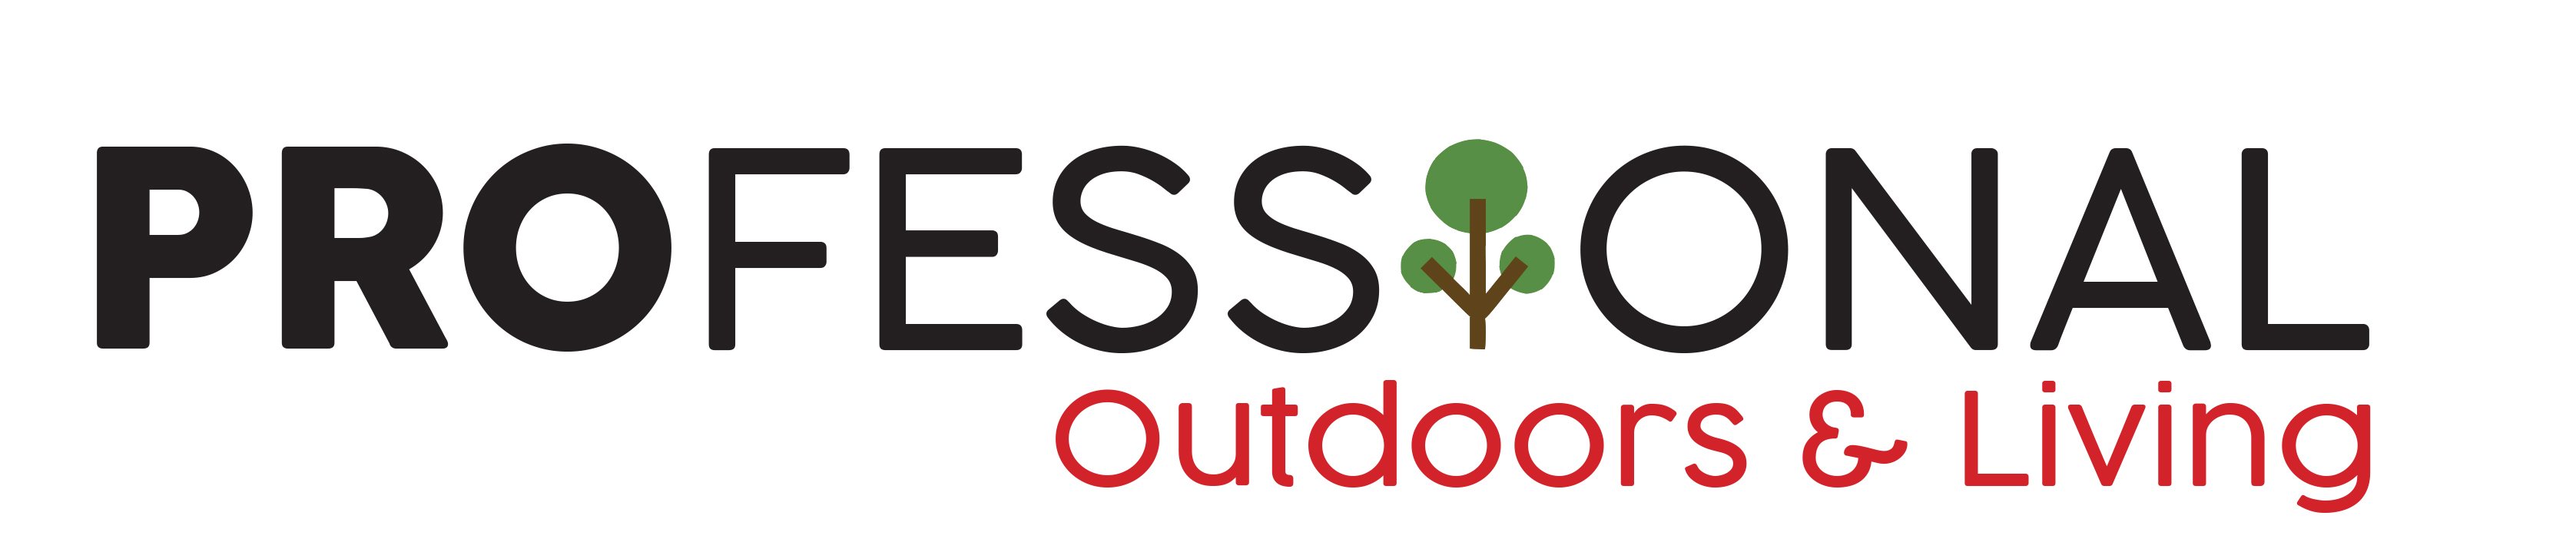 PROFESSIONAL OUTDOOR & LIVING